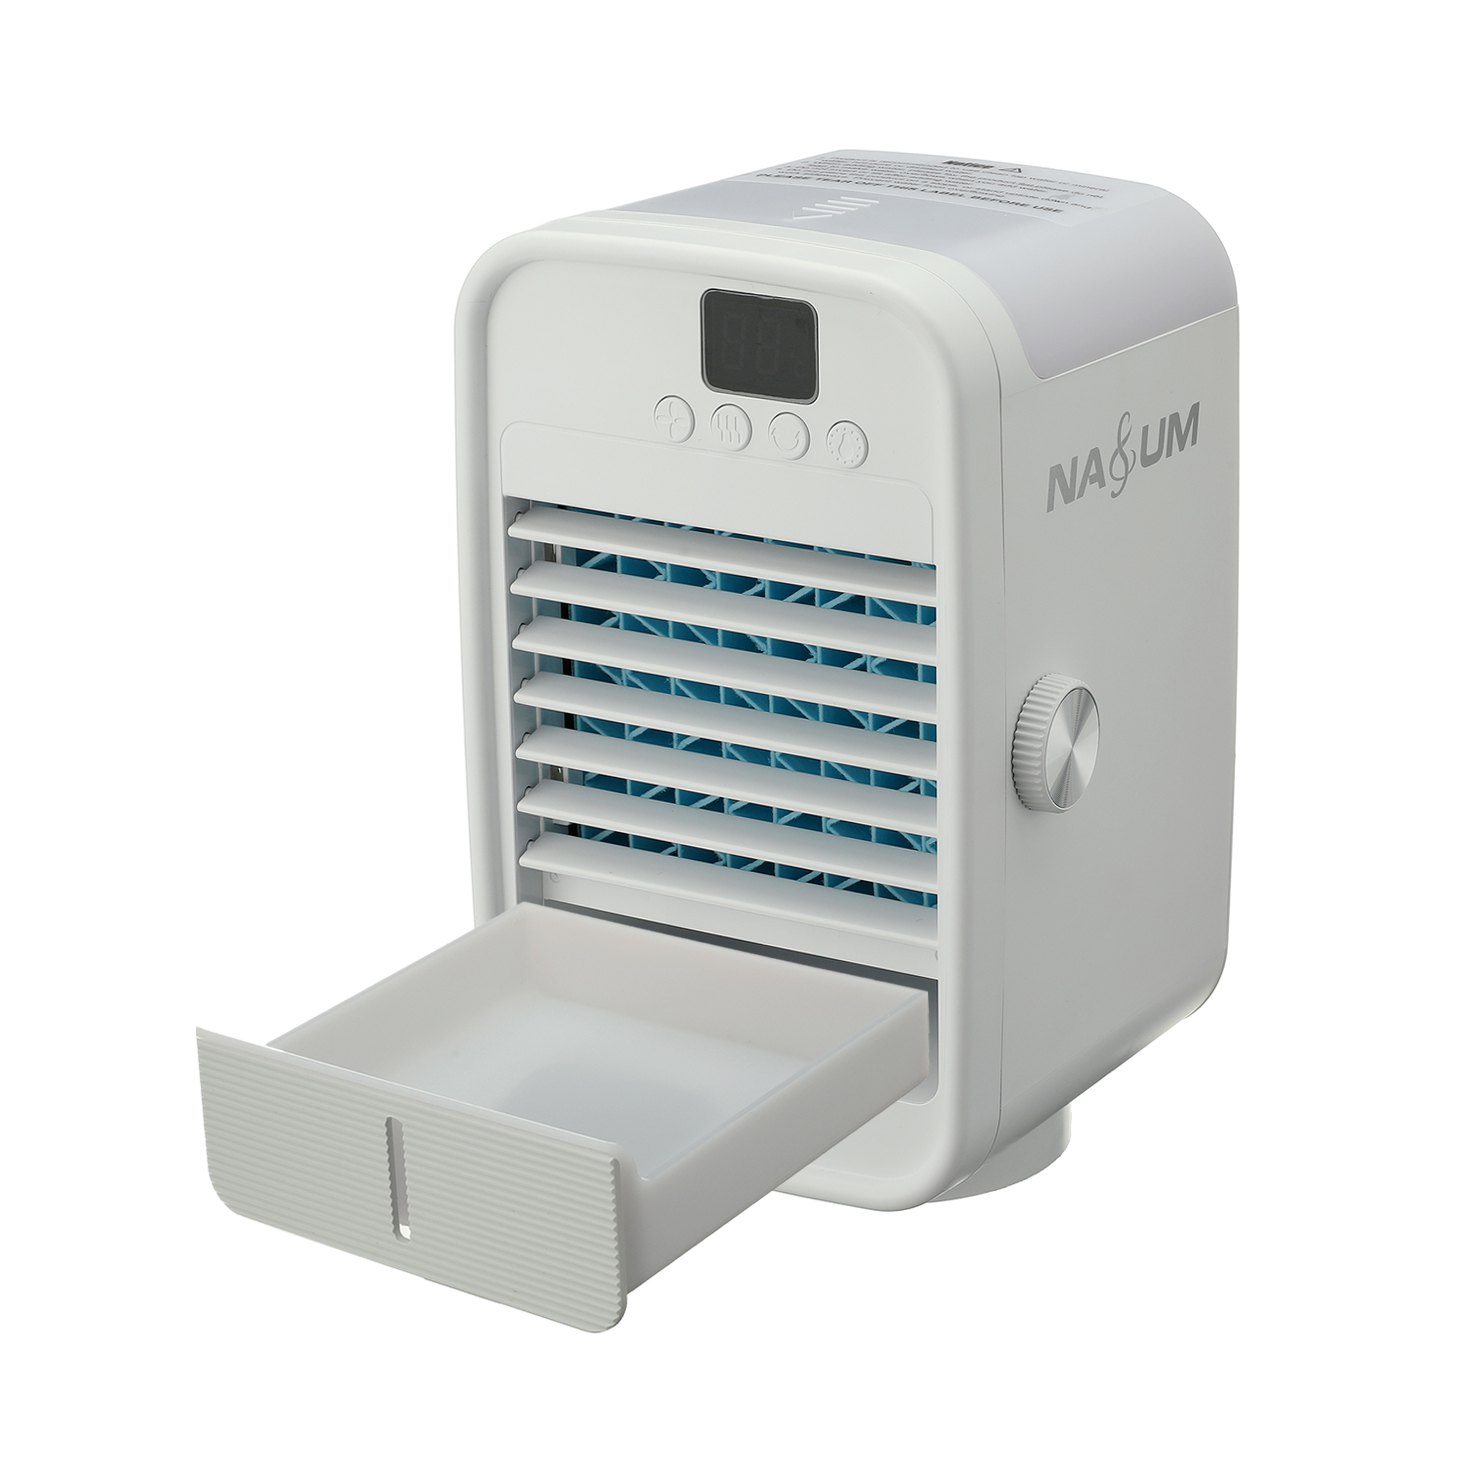 5-in-1-Mini-Air-Cooler-3-Wind-Speed-Adjustment-120deg-Wide-Angle-Rotation-Air-Humidification-Conditi-1885105-17